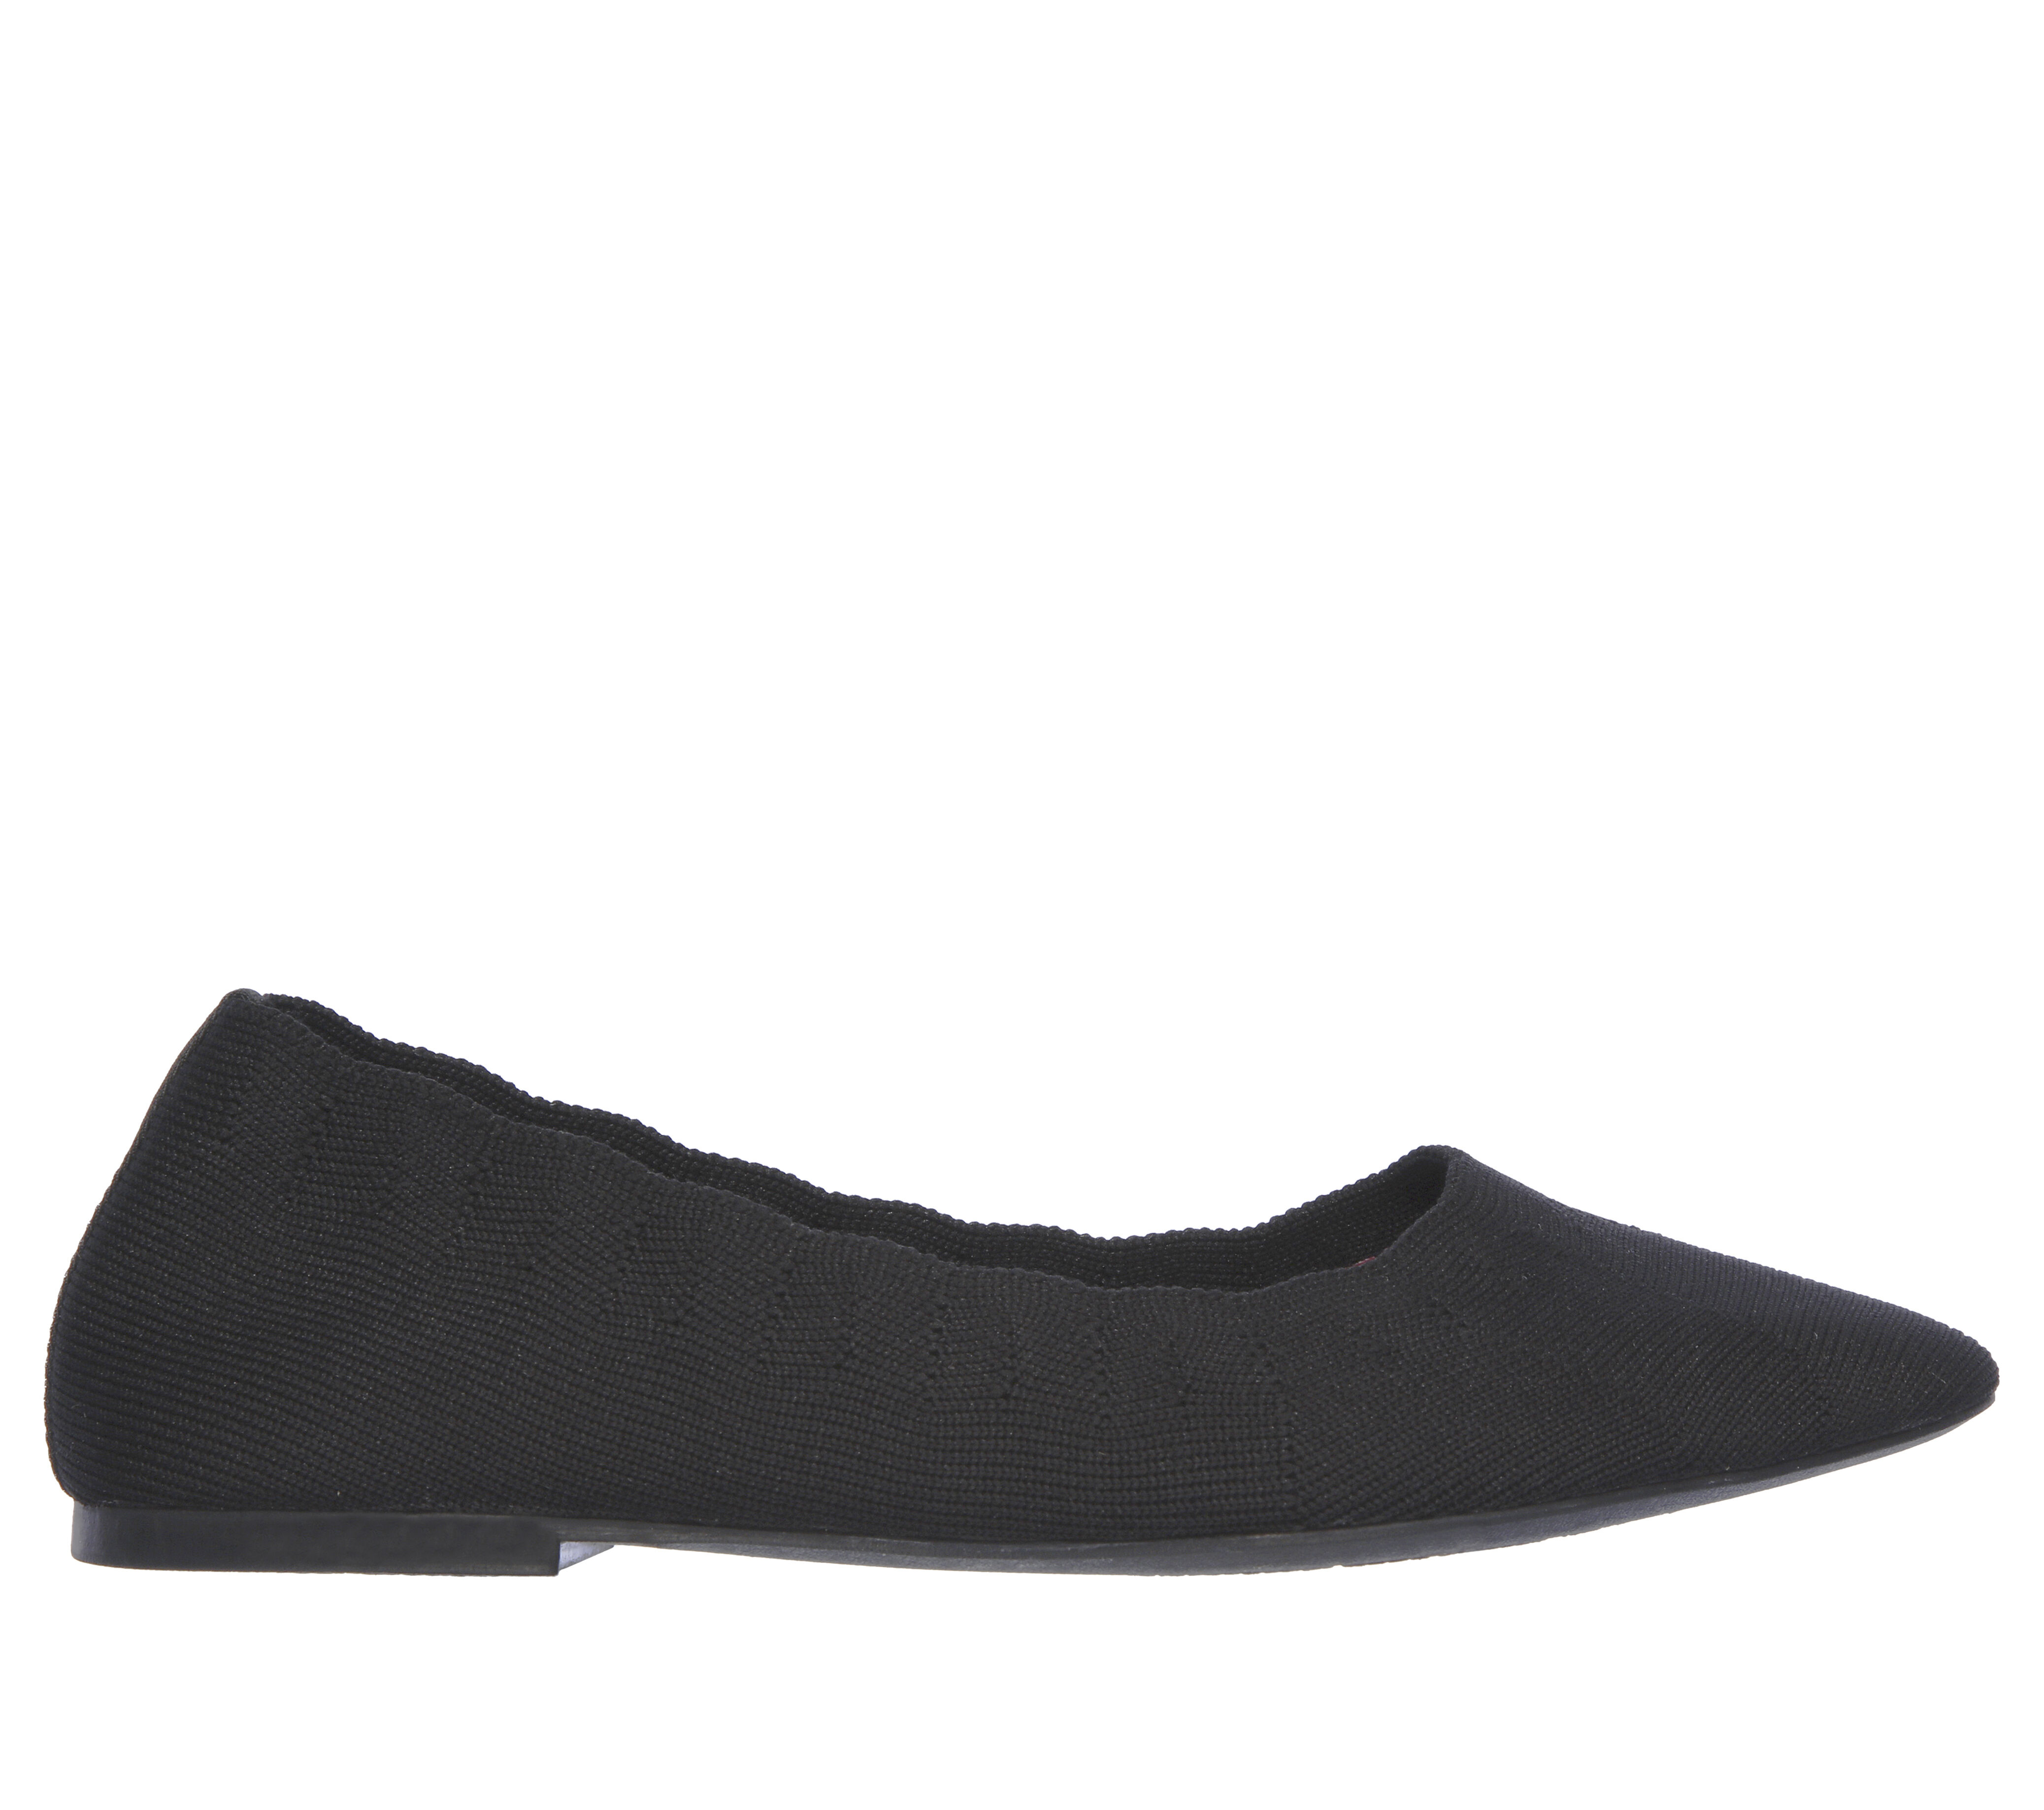 skechers bewitch flats